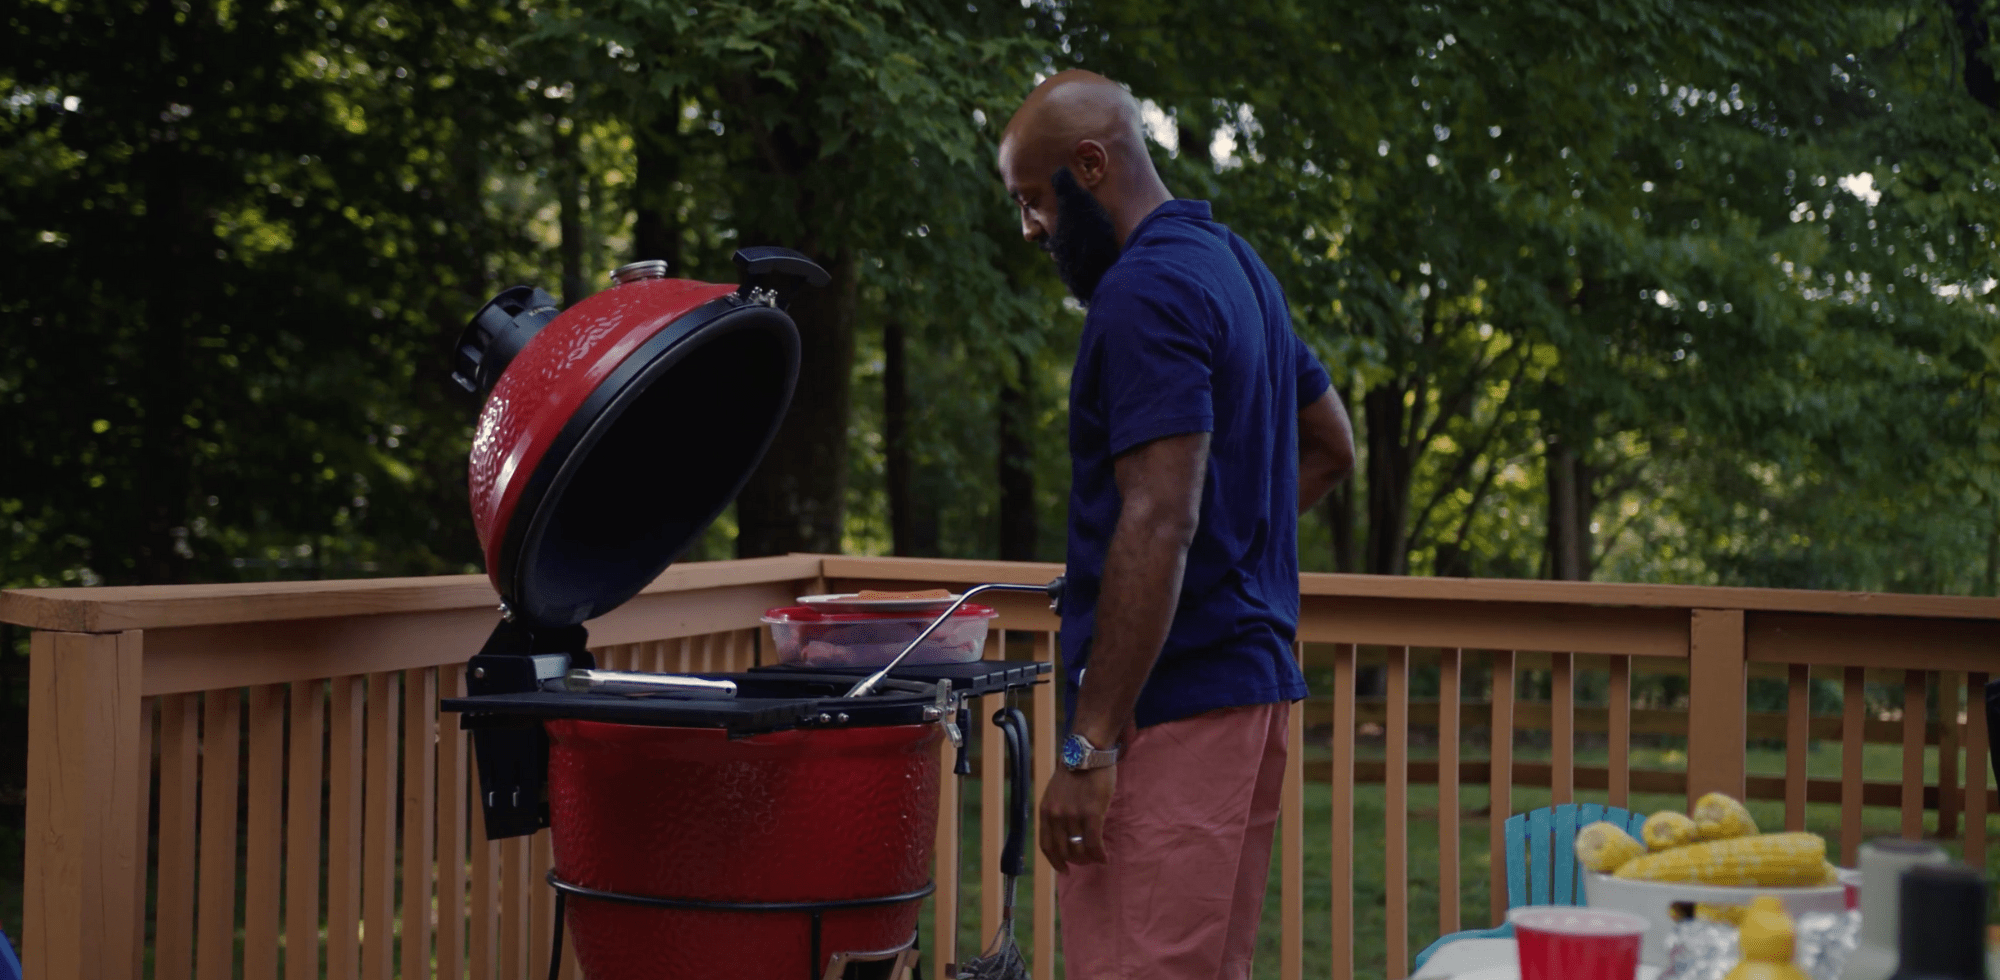 Man grilling on red egg with Rocketfire